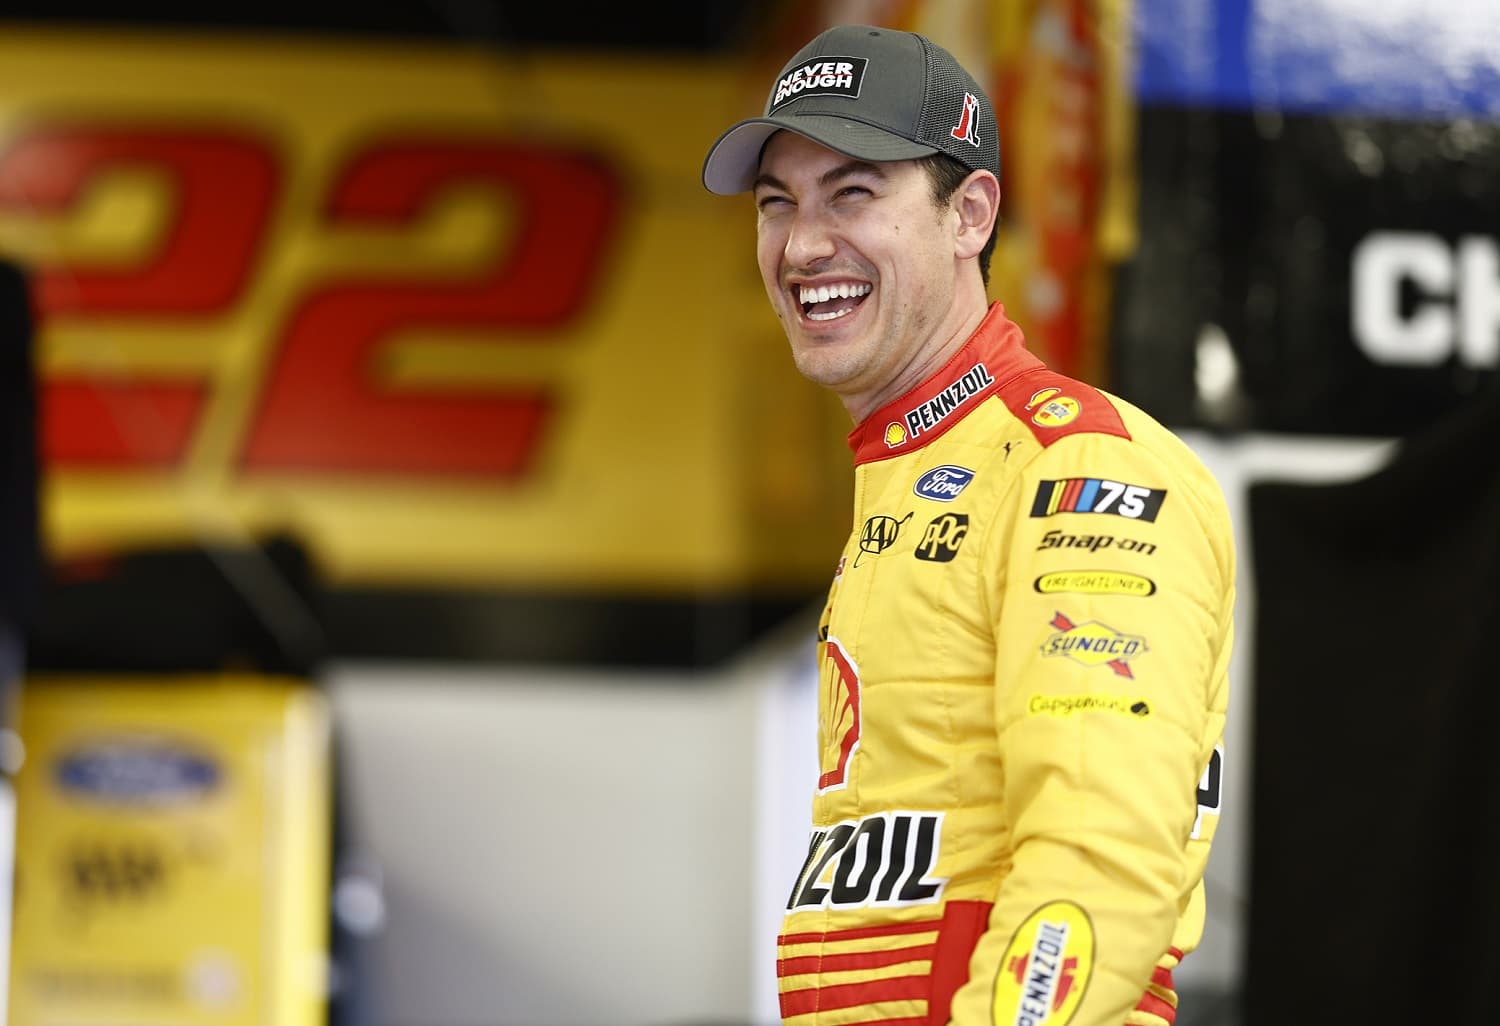 Joey Logano laughs in the garage area during practice for the NASCAR Cup Series Daytona 500 on Feb. 17, 2023.